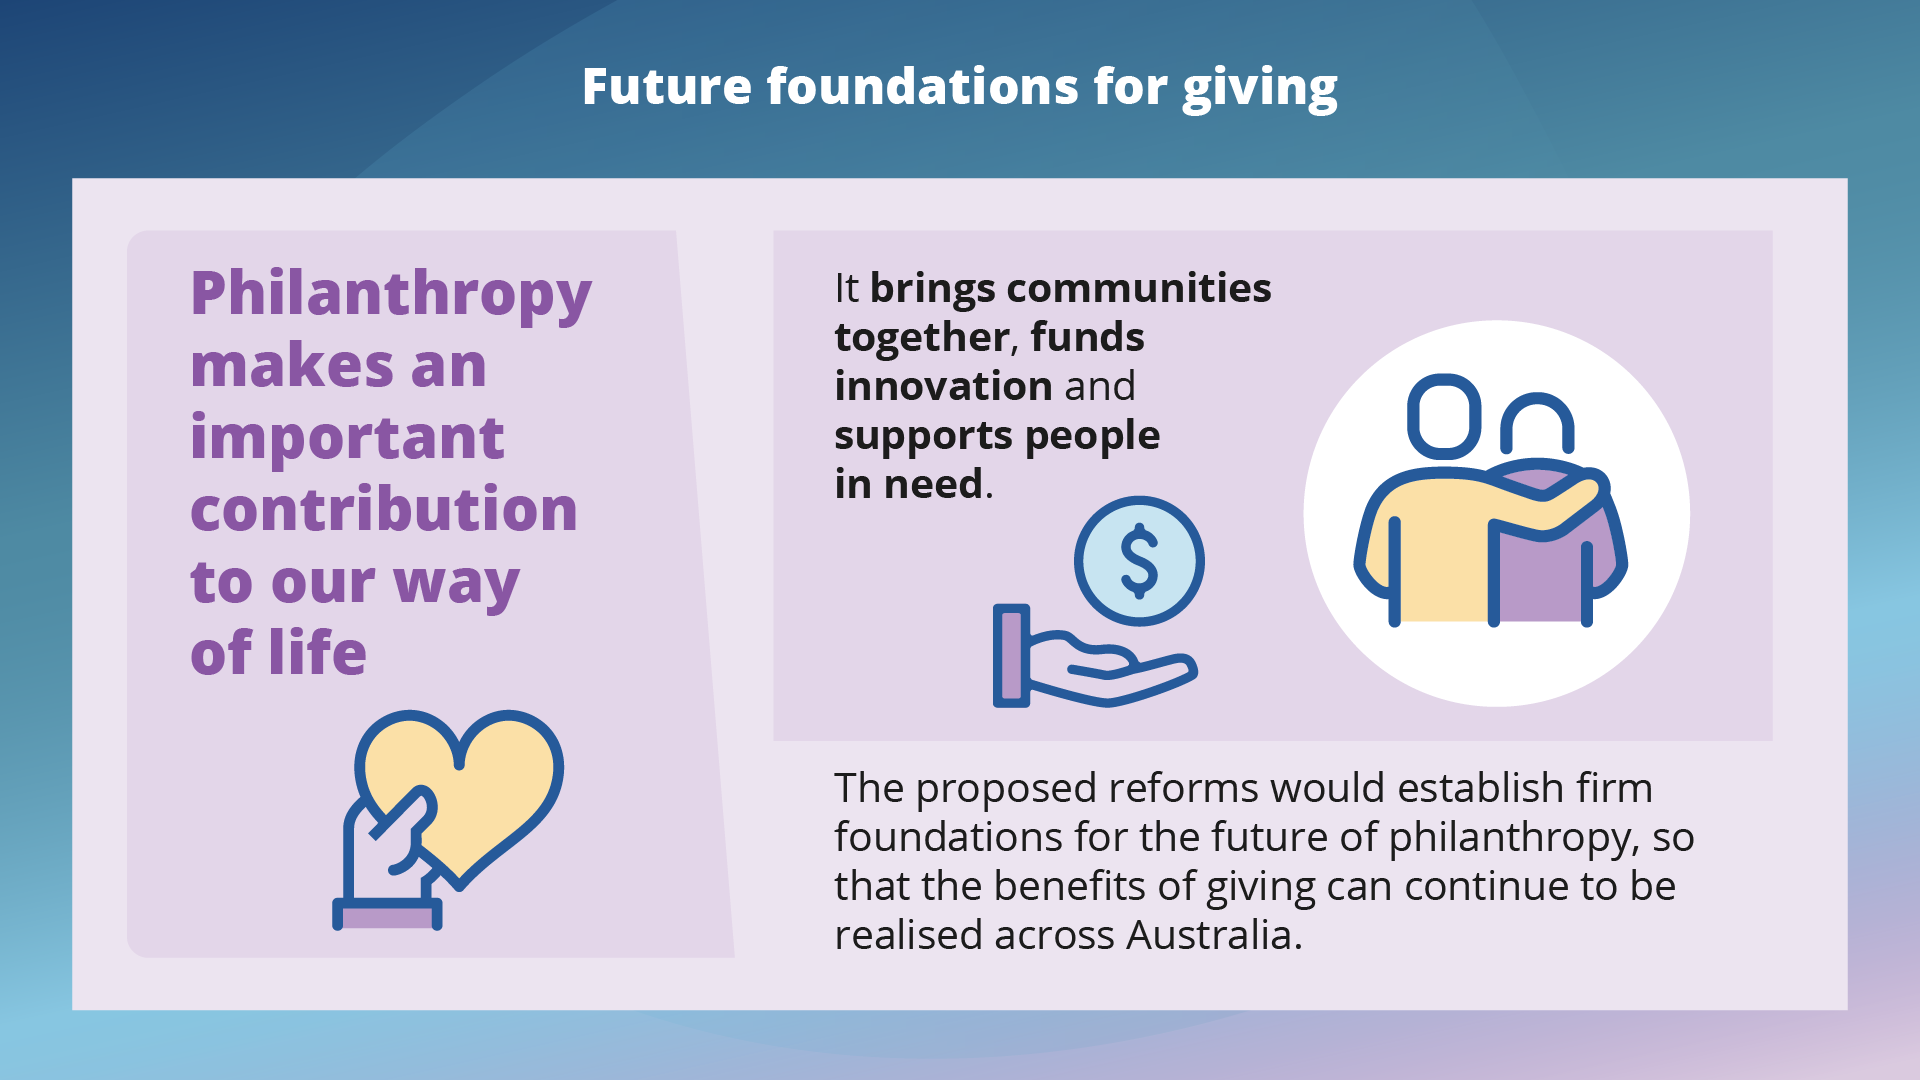 Future foundations for giving. Philanthropy makes an important contribution to our way of life. It brings communities together, funds innovation and supports people in need. The proposed reforms would establish firm foundations for the future of philanthropy, so that the benefits of giving can continue to be realised across Australia.